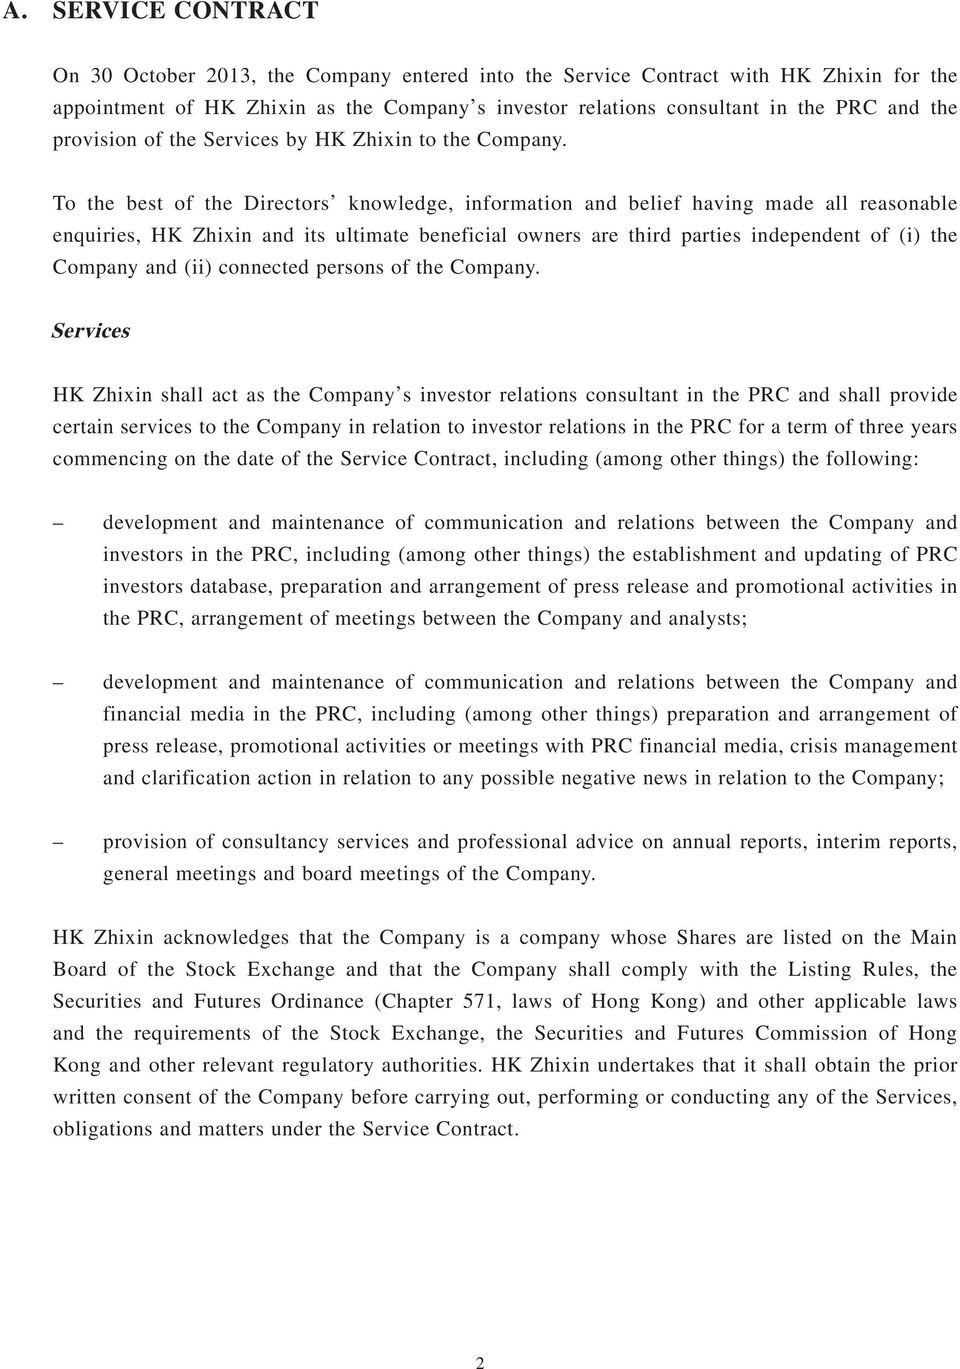 To the best of the Directors knowledge, information and belief having made all reasonable enquiries, HK Zhixin and its ultimate beneficial owners are third parties independent of (i) the Company and